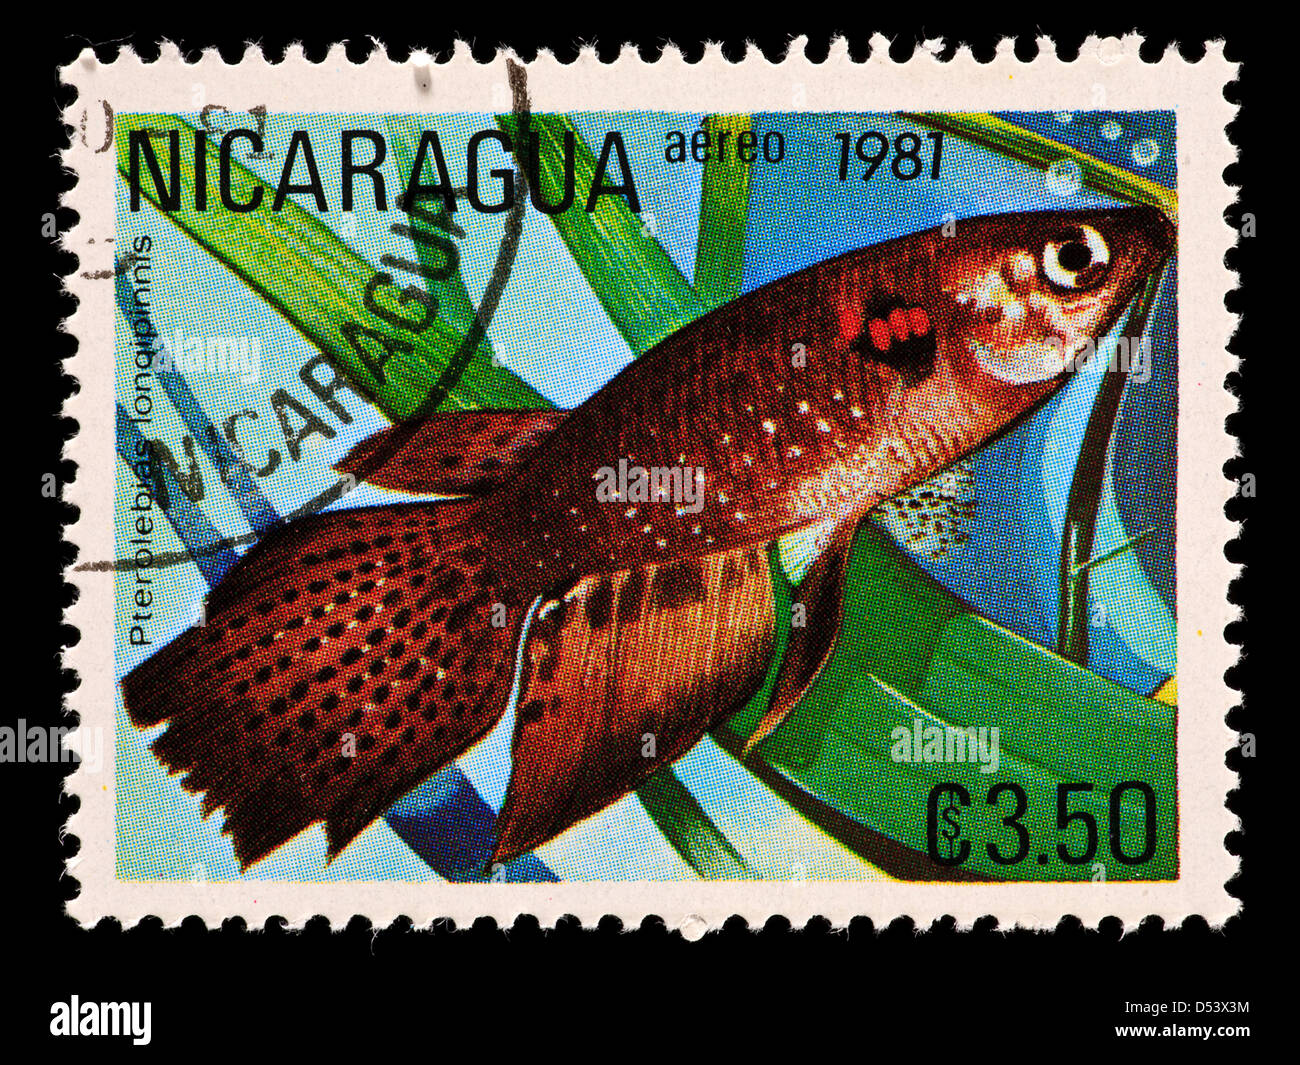 Postage stamp from Nicaragua depicting a longfin killie (Pterolebias longipinnis) Stock Photo